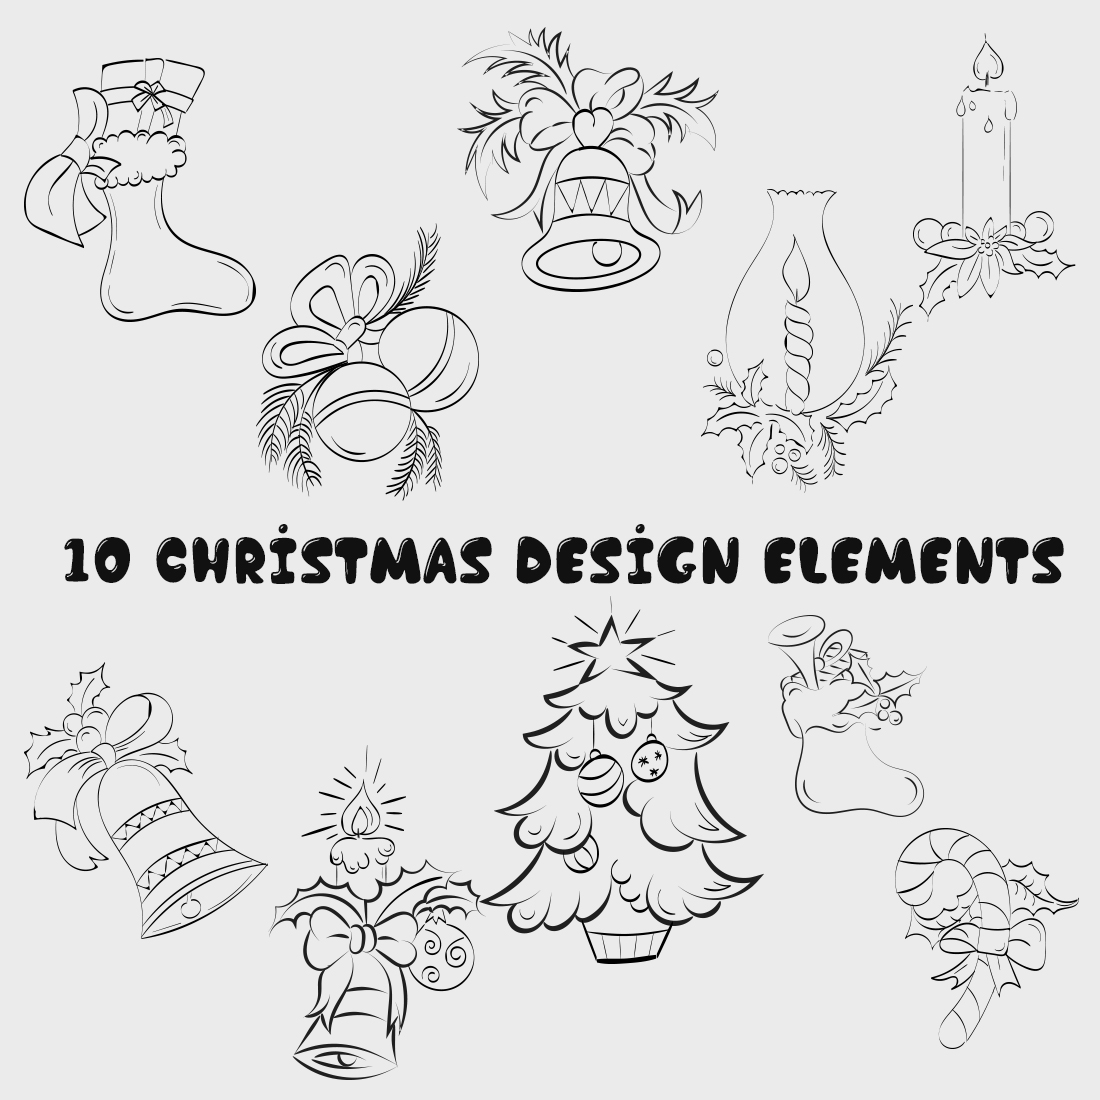 Design Elements Christmas cover image.